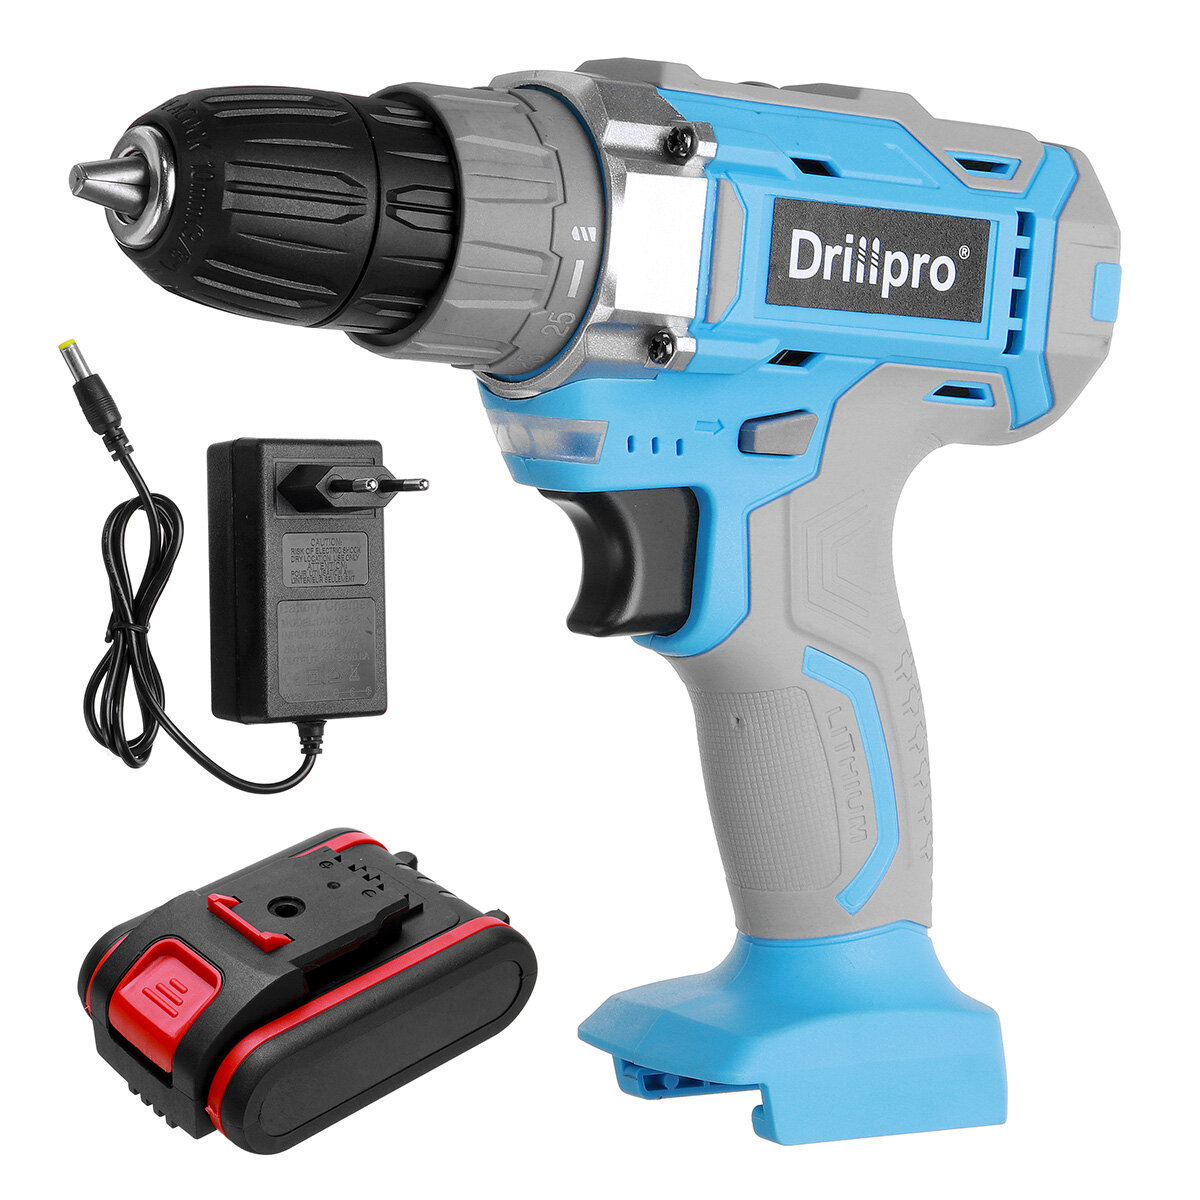 Image of Drillpro 1200rpm 15AH Electric Drill Wood Drilling Screwdriver Woodworking Tool with Battery